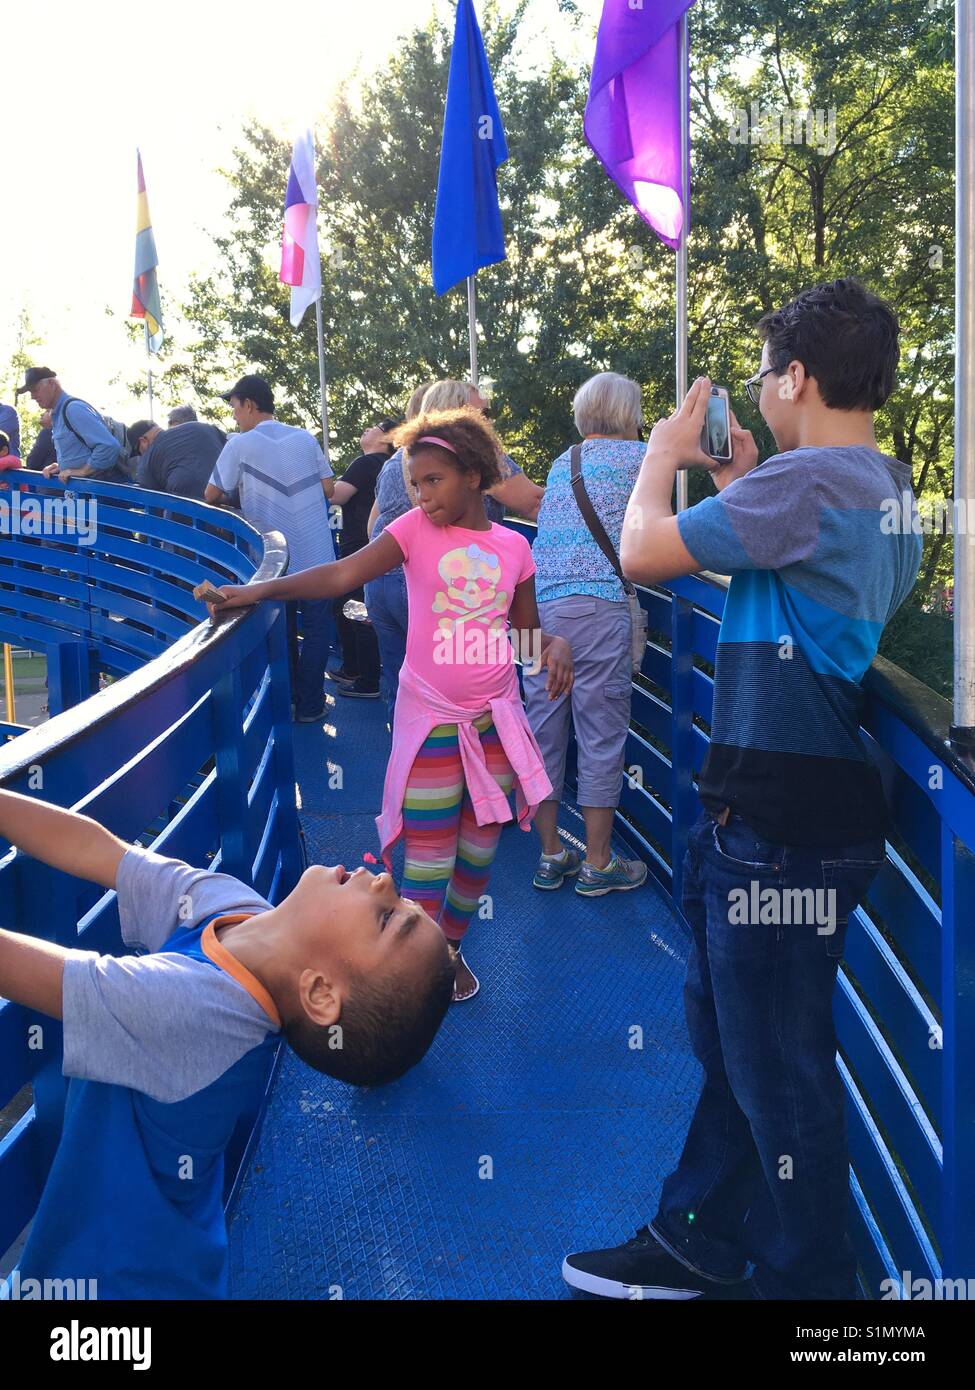 Minnesota State Fair. Kids can't wait in a long line to get to attractions. August 28,2017 Stock Photo